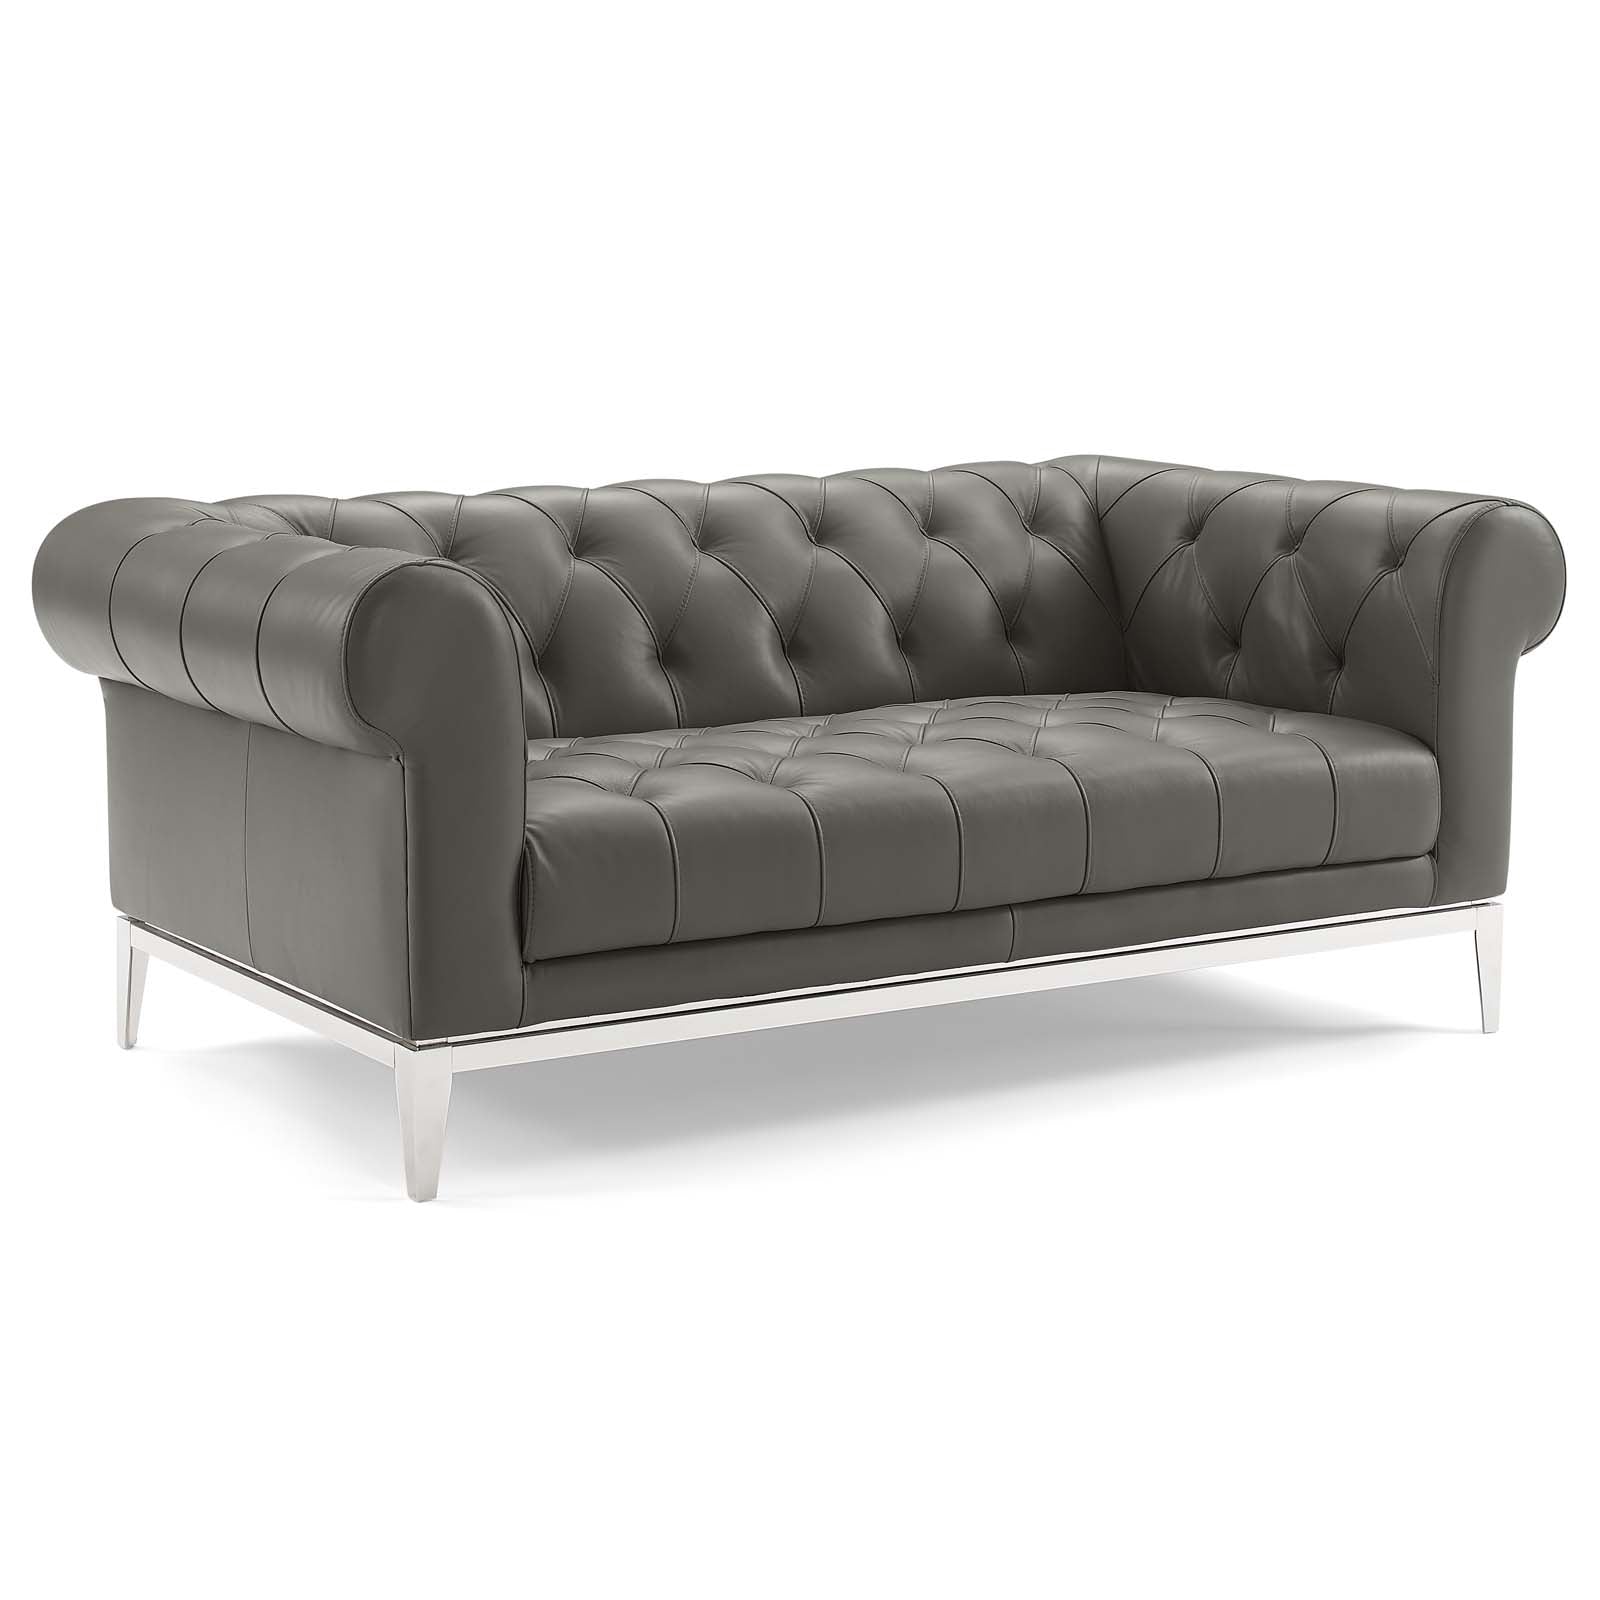 Idyll Tufted Upholstered Leather Loveseat and Armchair - East Shore Modern Home Furnishings